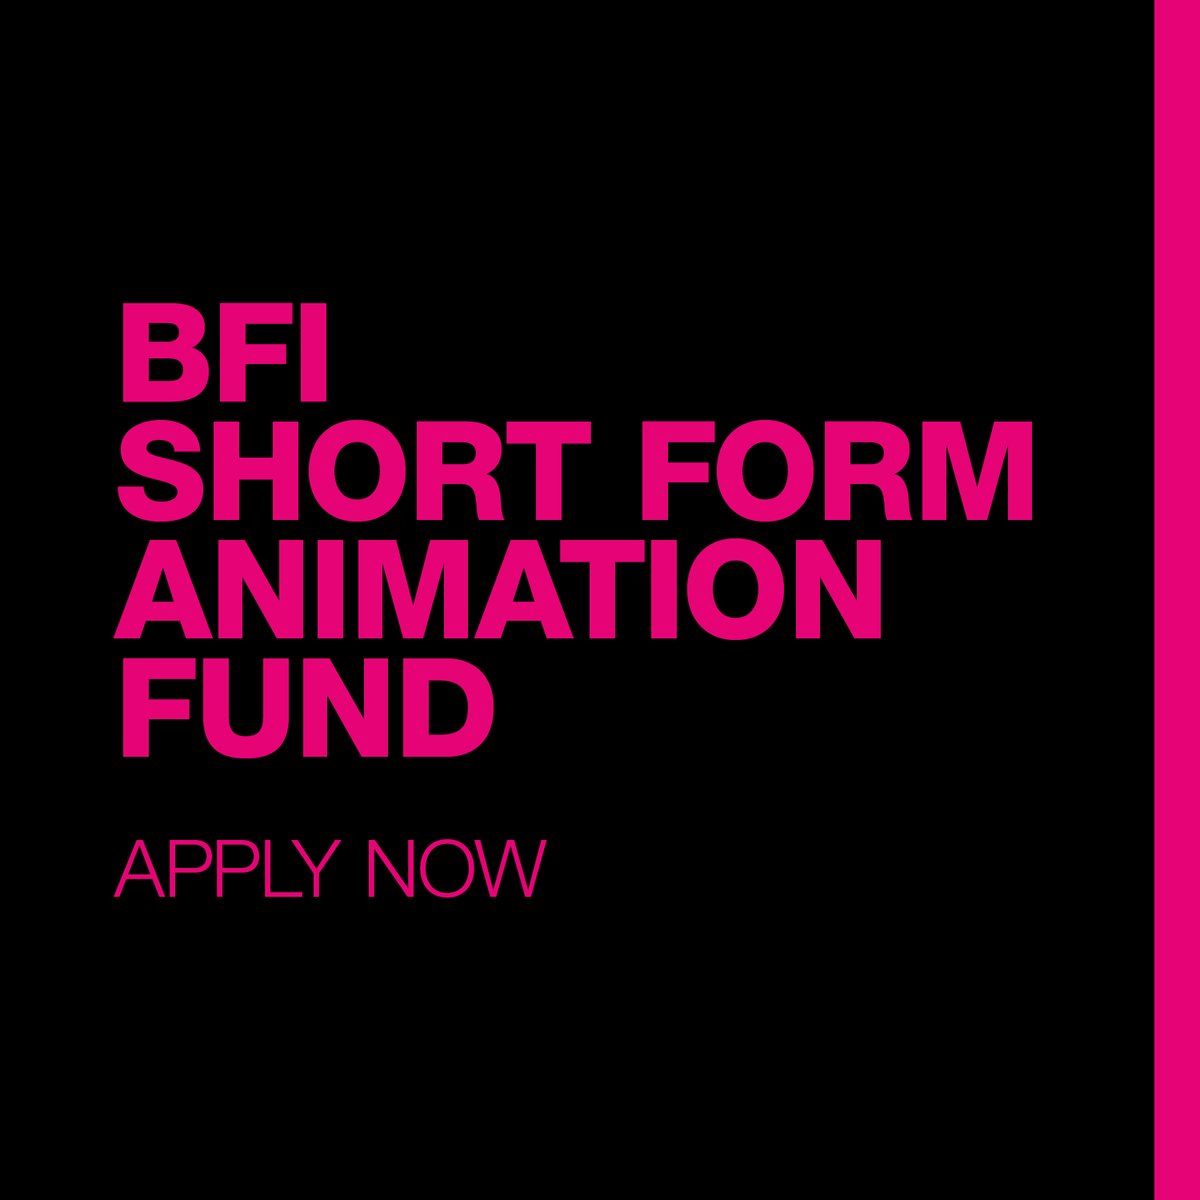 Applications for the BFI Short Form Animation Fund are now open. The fund supports higher-budget narrative short form projects in any animated technique or genre. Apply by Tue 9 Jul theb.fi/4aaqMwL #NationalLottery funded